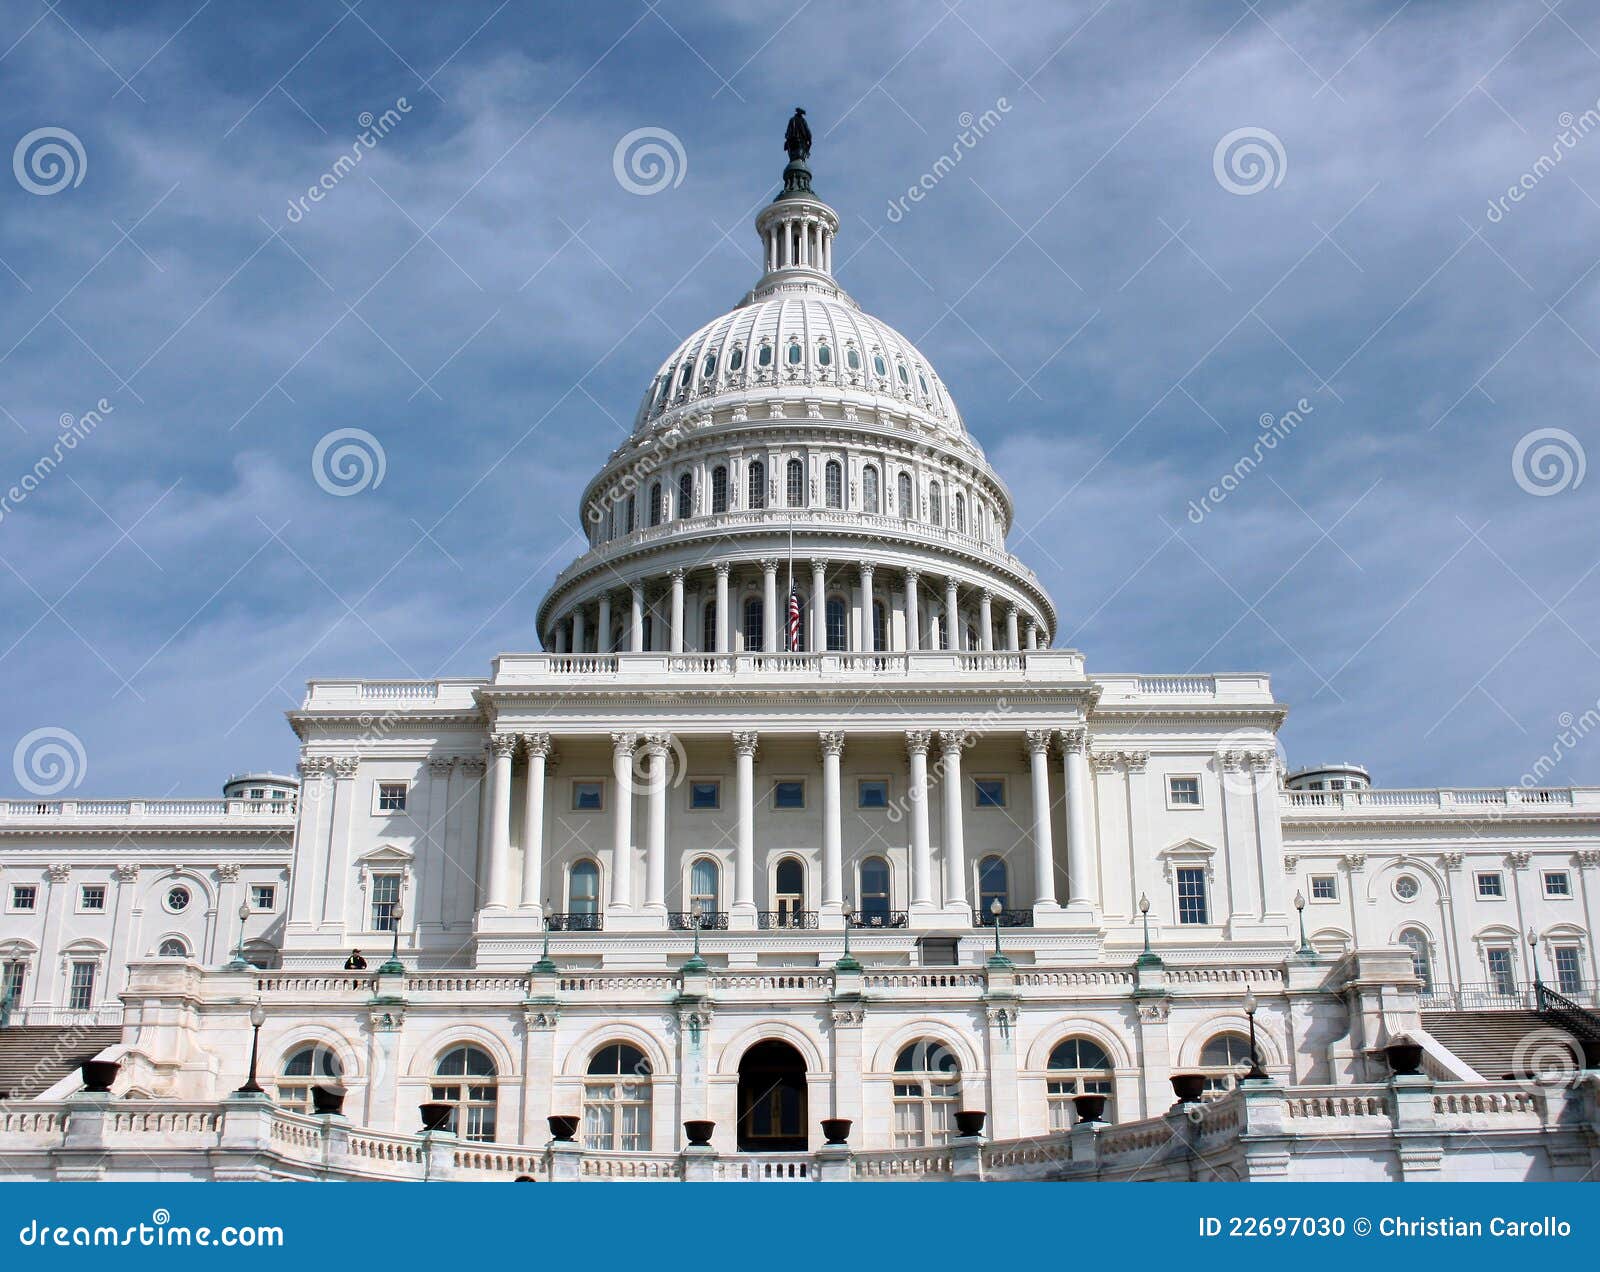 http://thumbs.dreamstime.com/z/front-view-us-capitol-building-22697030.jpg